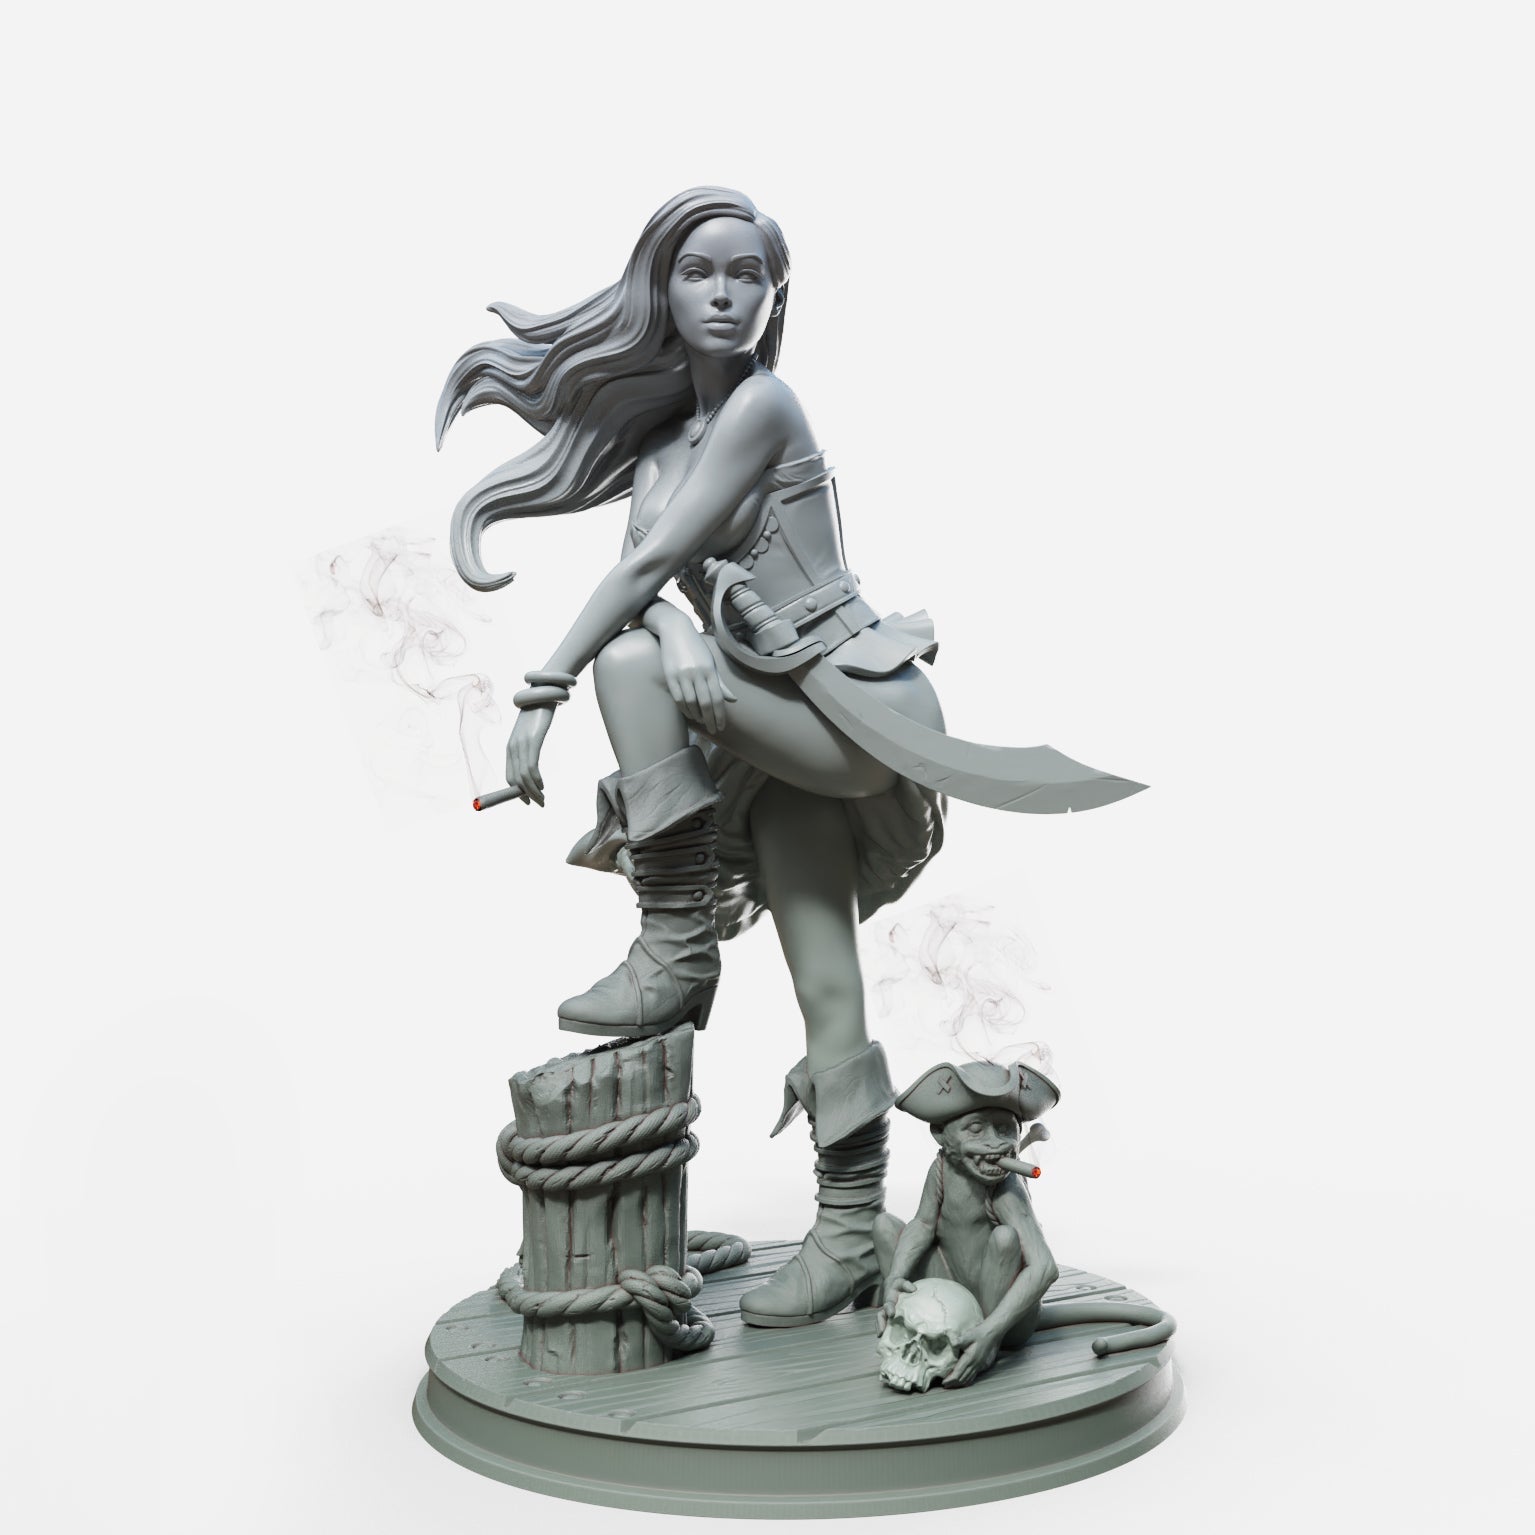 Marina 3 NSFW 3d Printed miniature FanArt by Female Miniatures Scaled Collectables Statues & Figurines